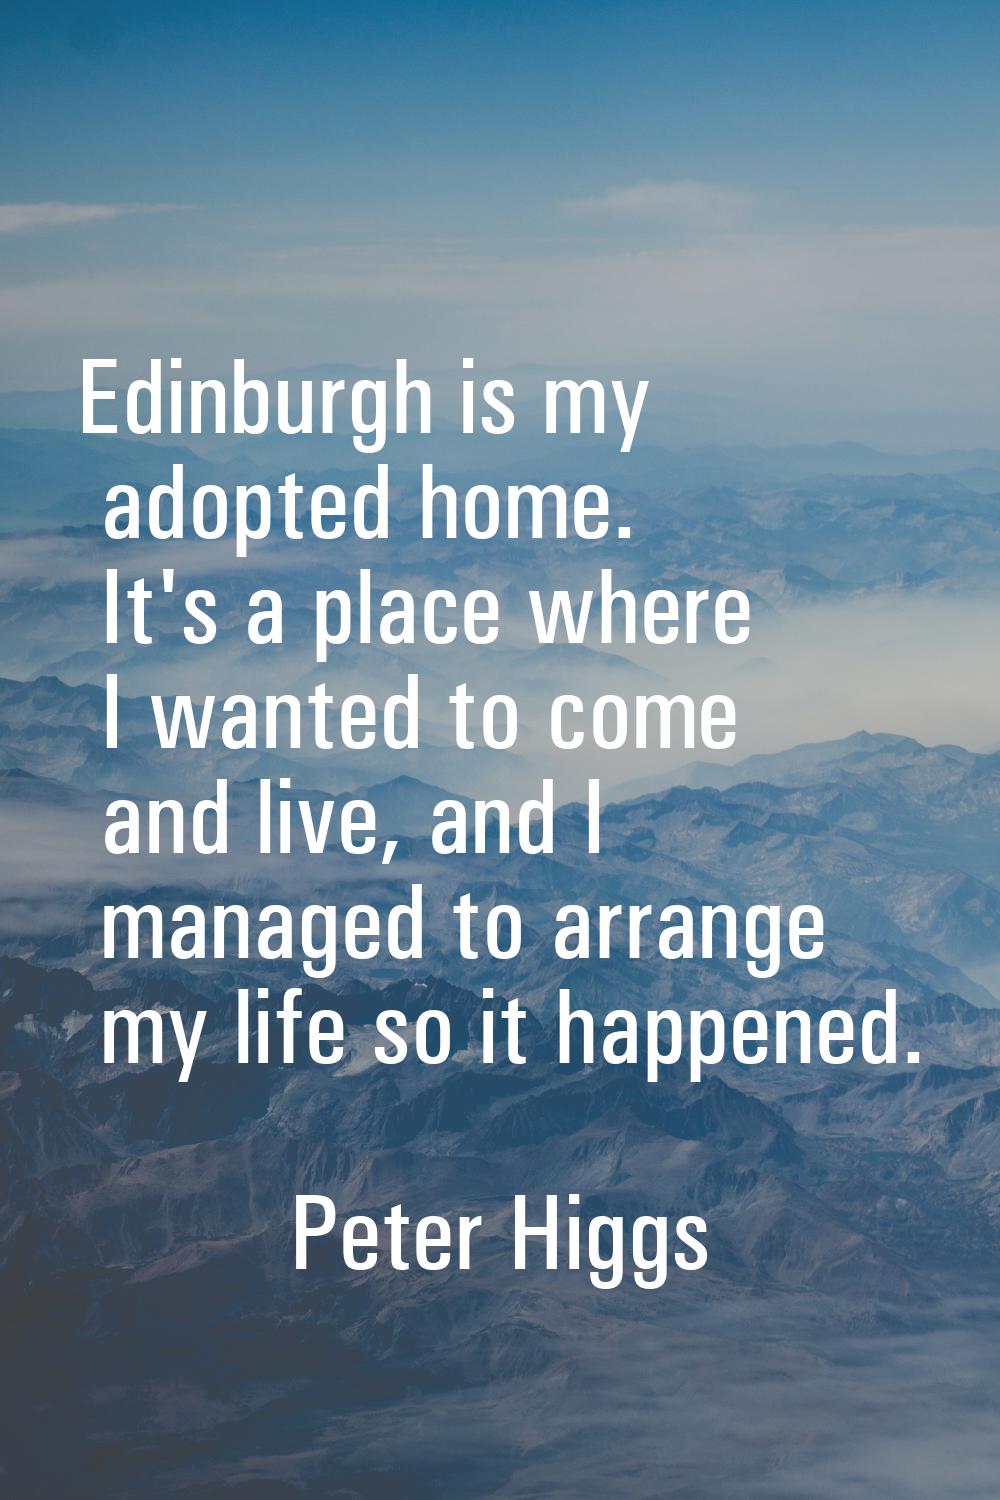 Edinburgh is my adopted home. It's a place where I wanted to come and live, and I managed to arrang